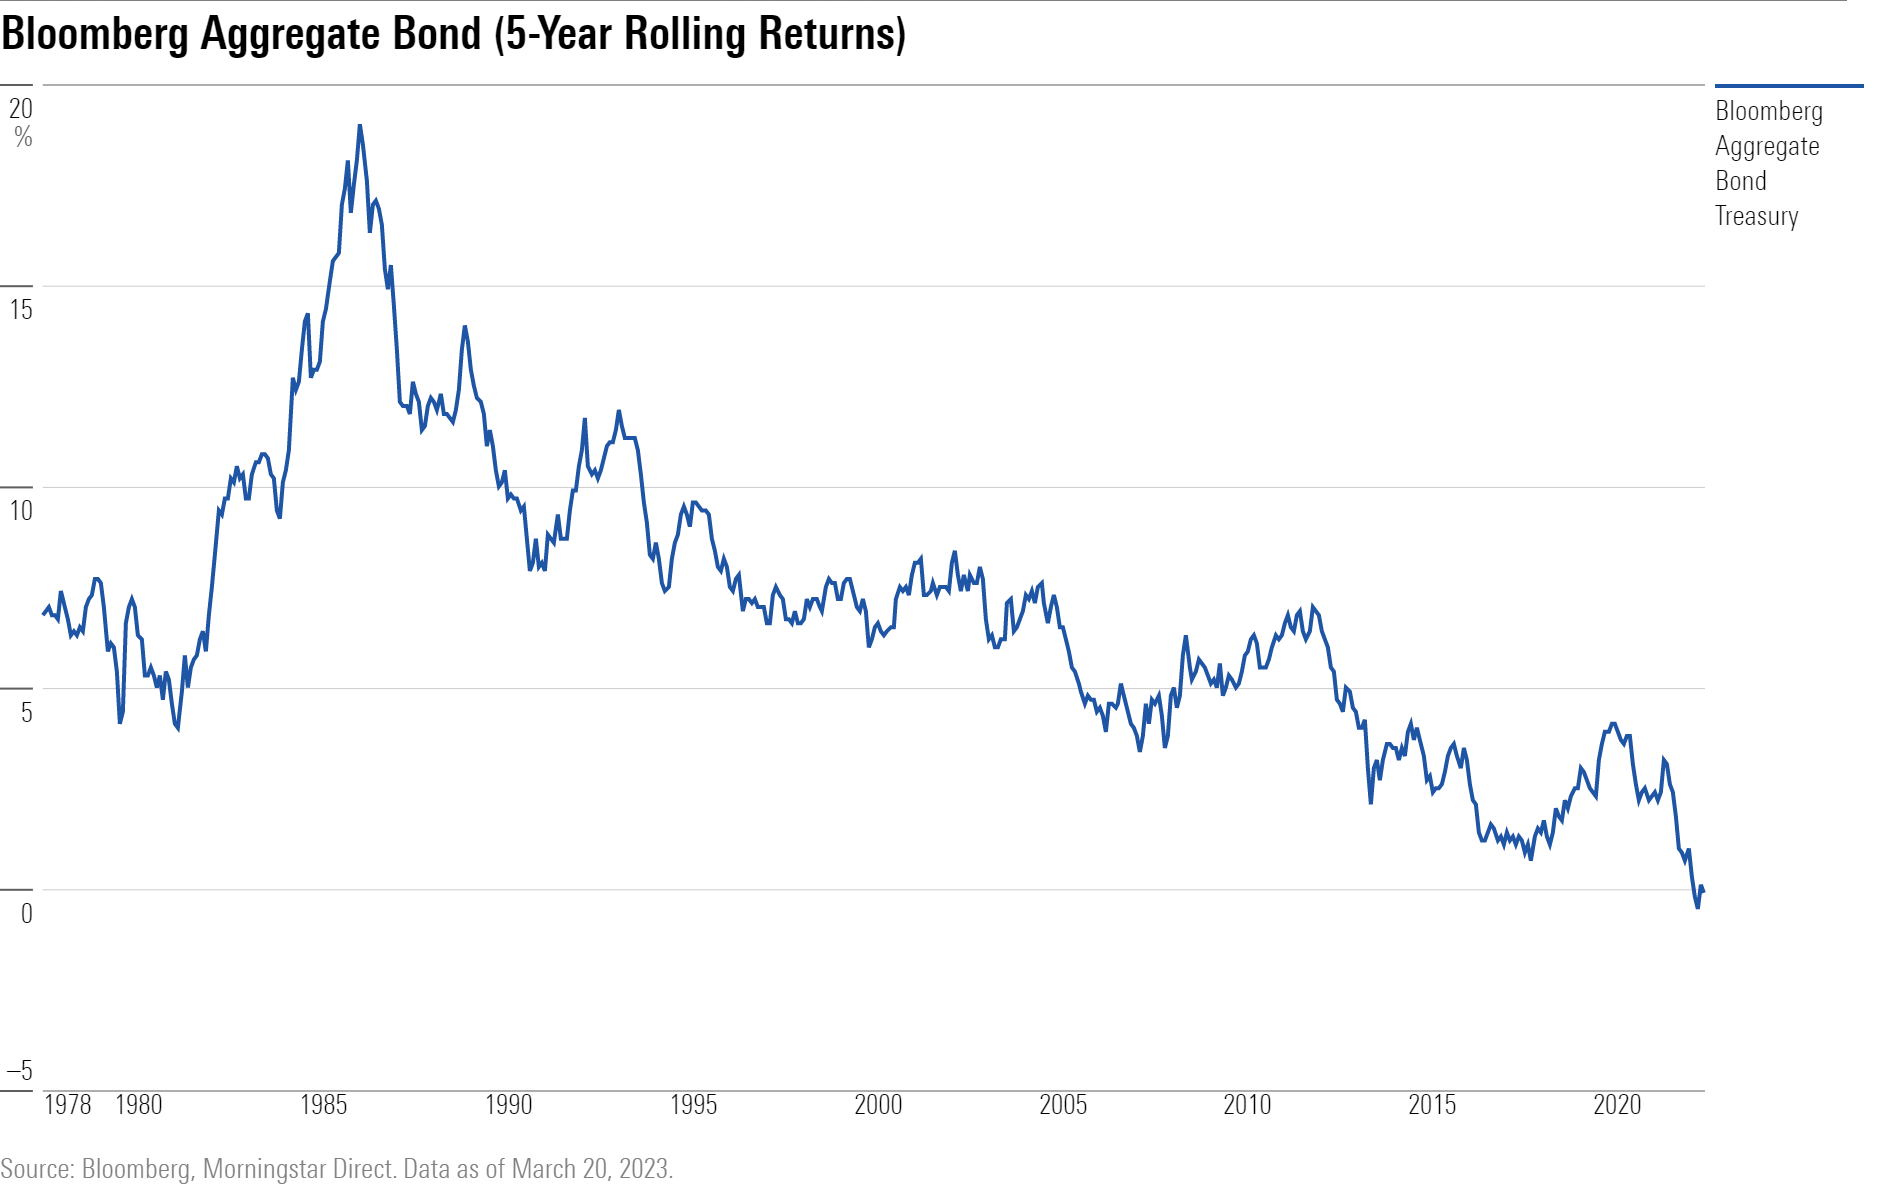 Line chart showing the 5 year rolling returns of the Bloomberg Aggregate Bond Treasury from 1978-2022.